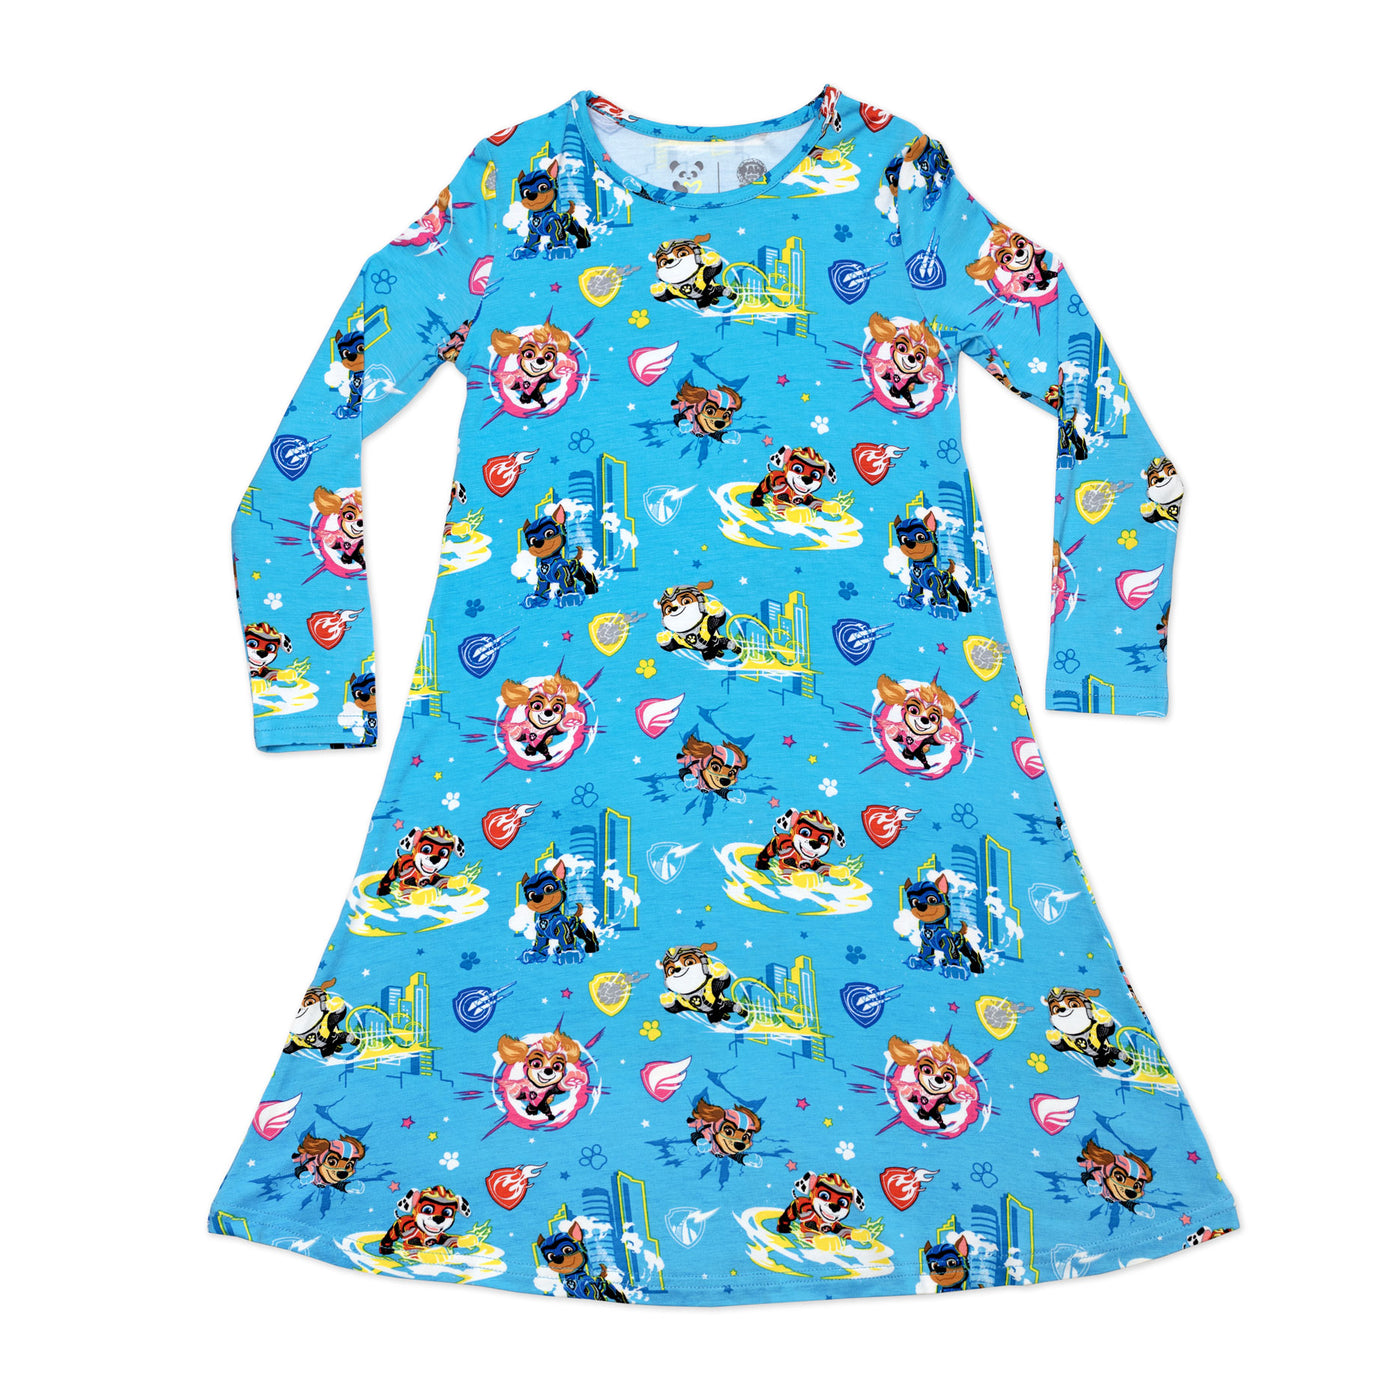 PAW Patrol: The Mighty Movie - Mighty Pups Bamboo Girls' Long Sleeve Dress